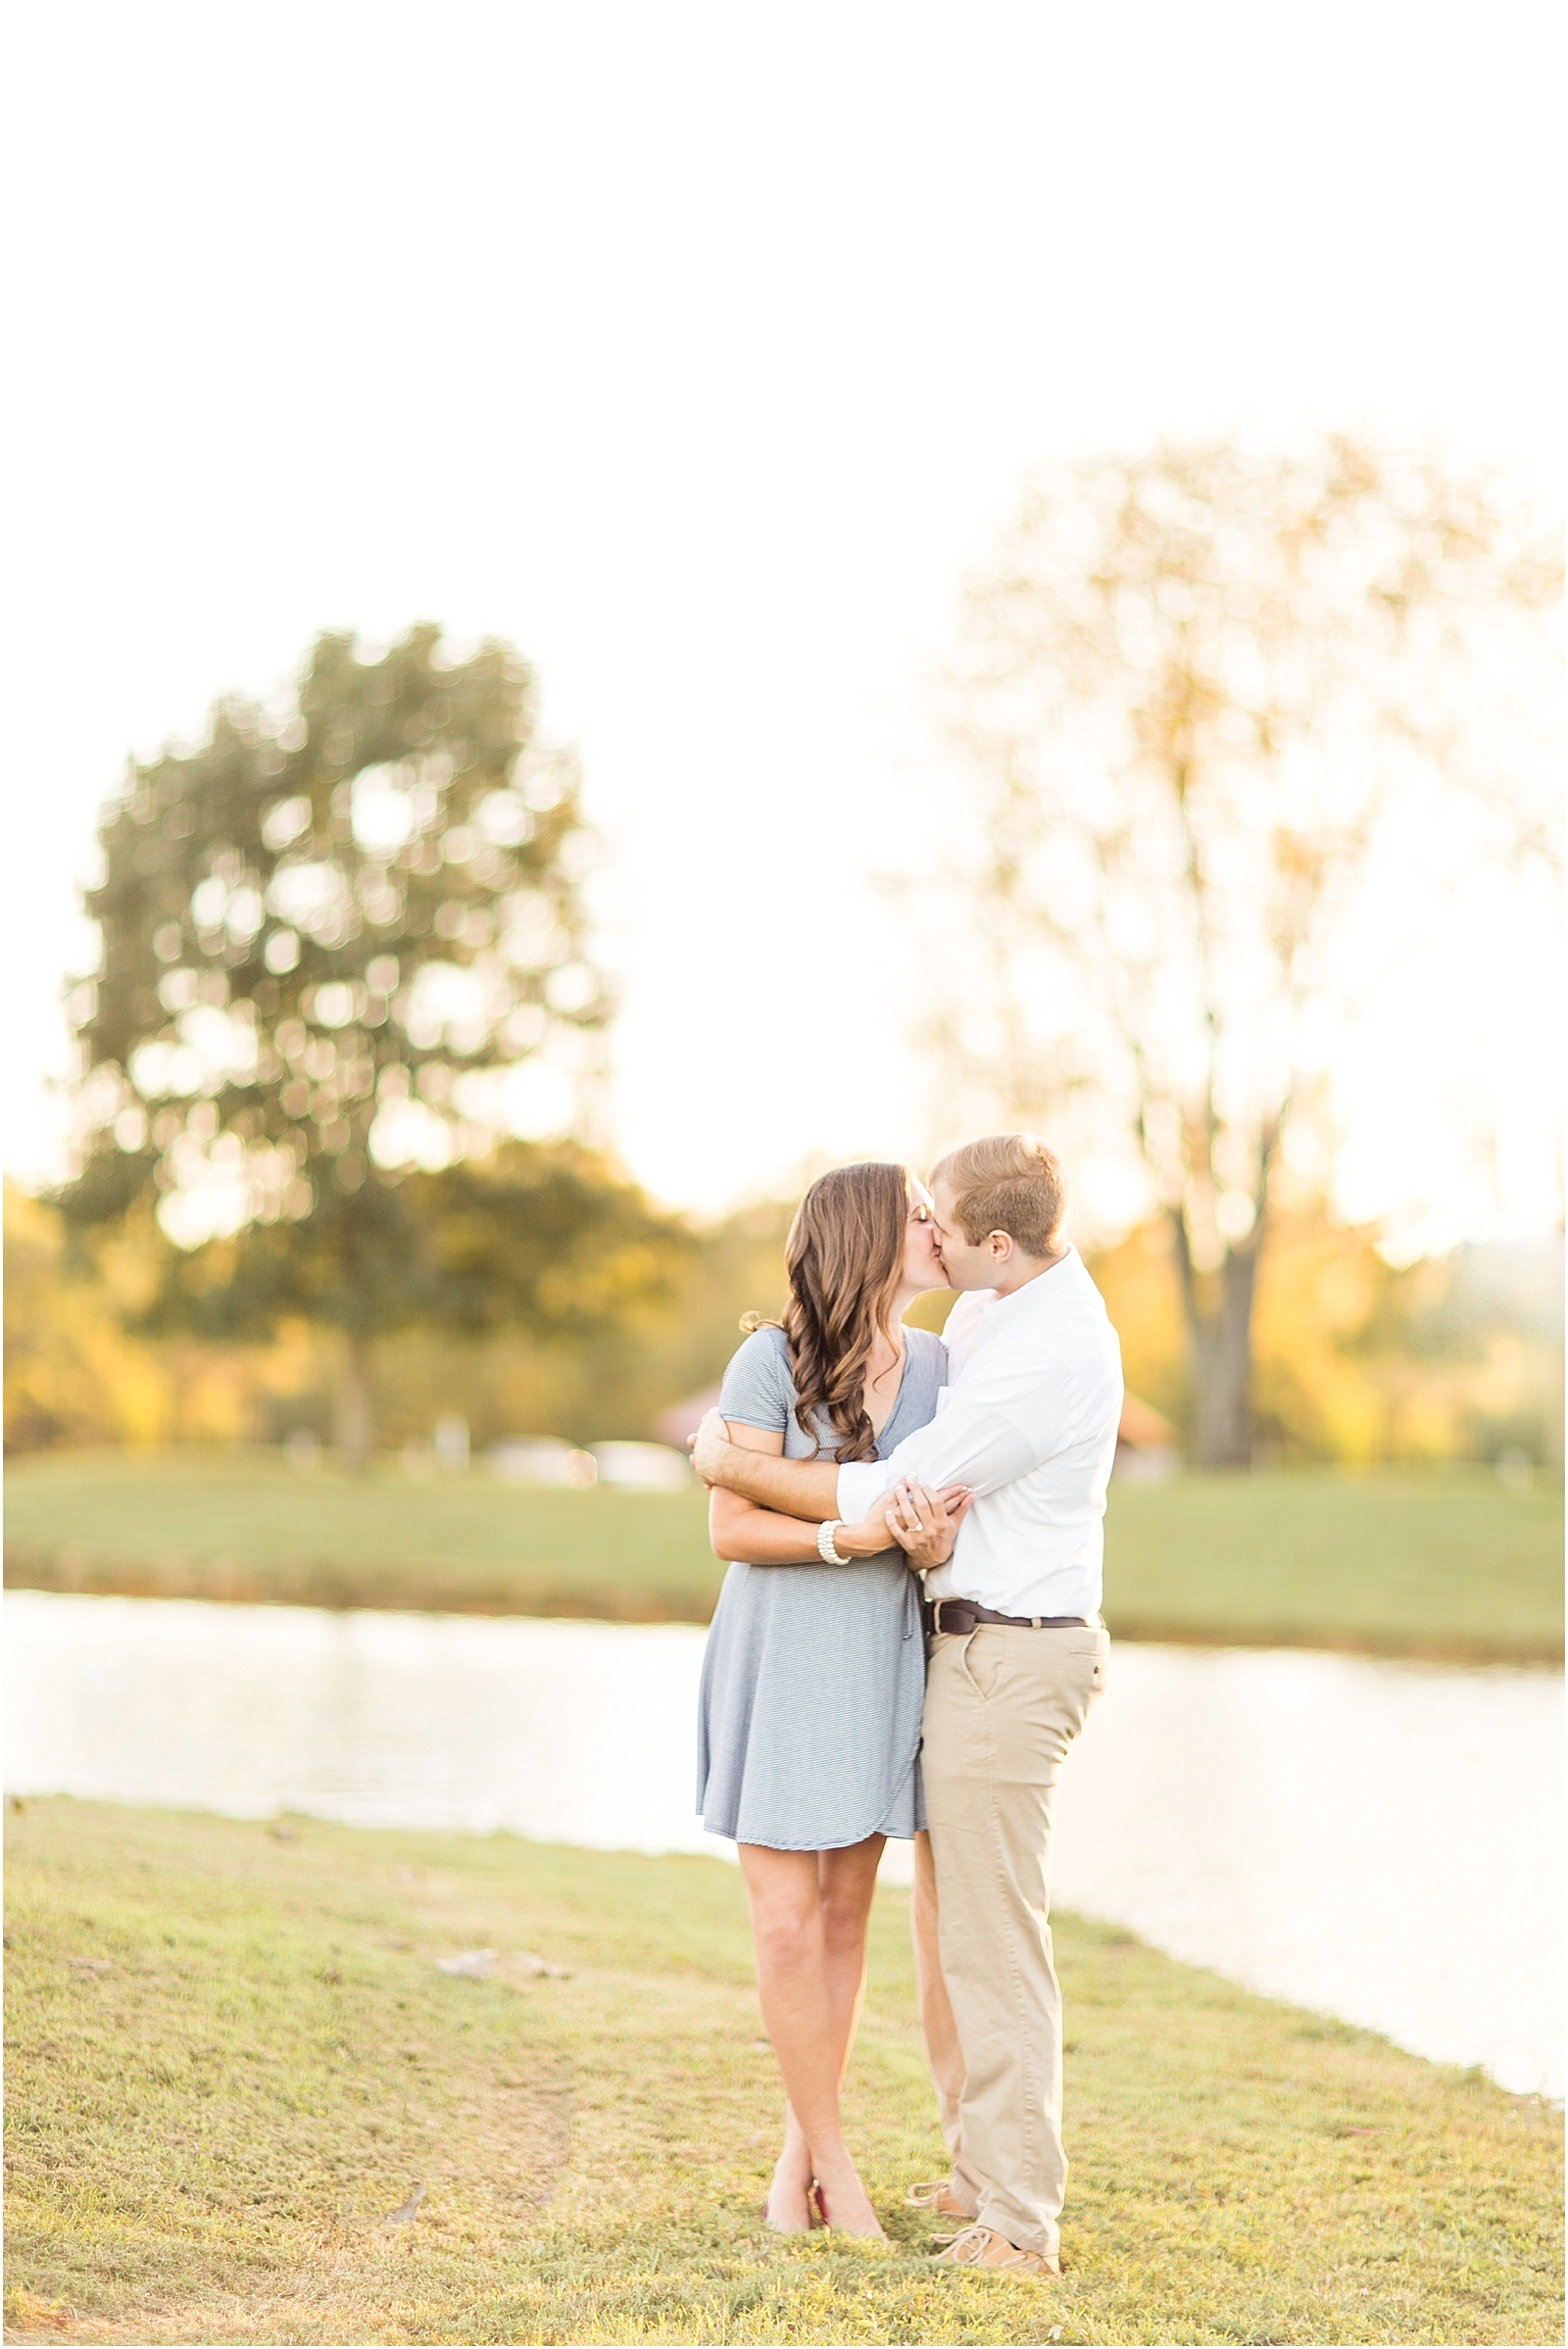 Stacey and Thomas | Engaged0012.jpg